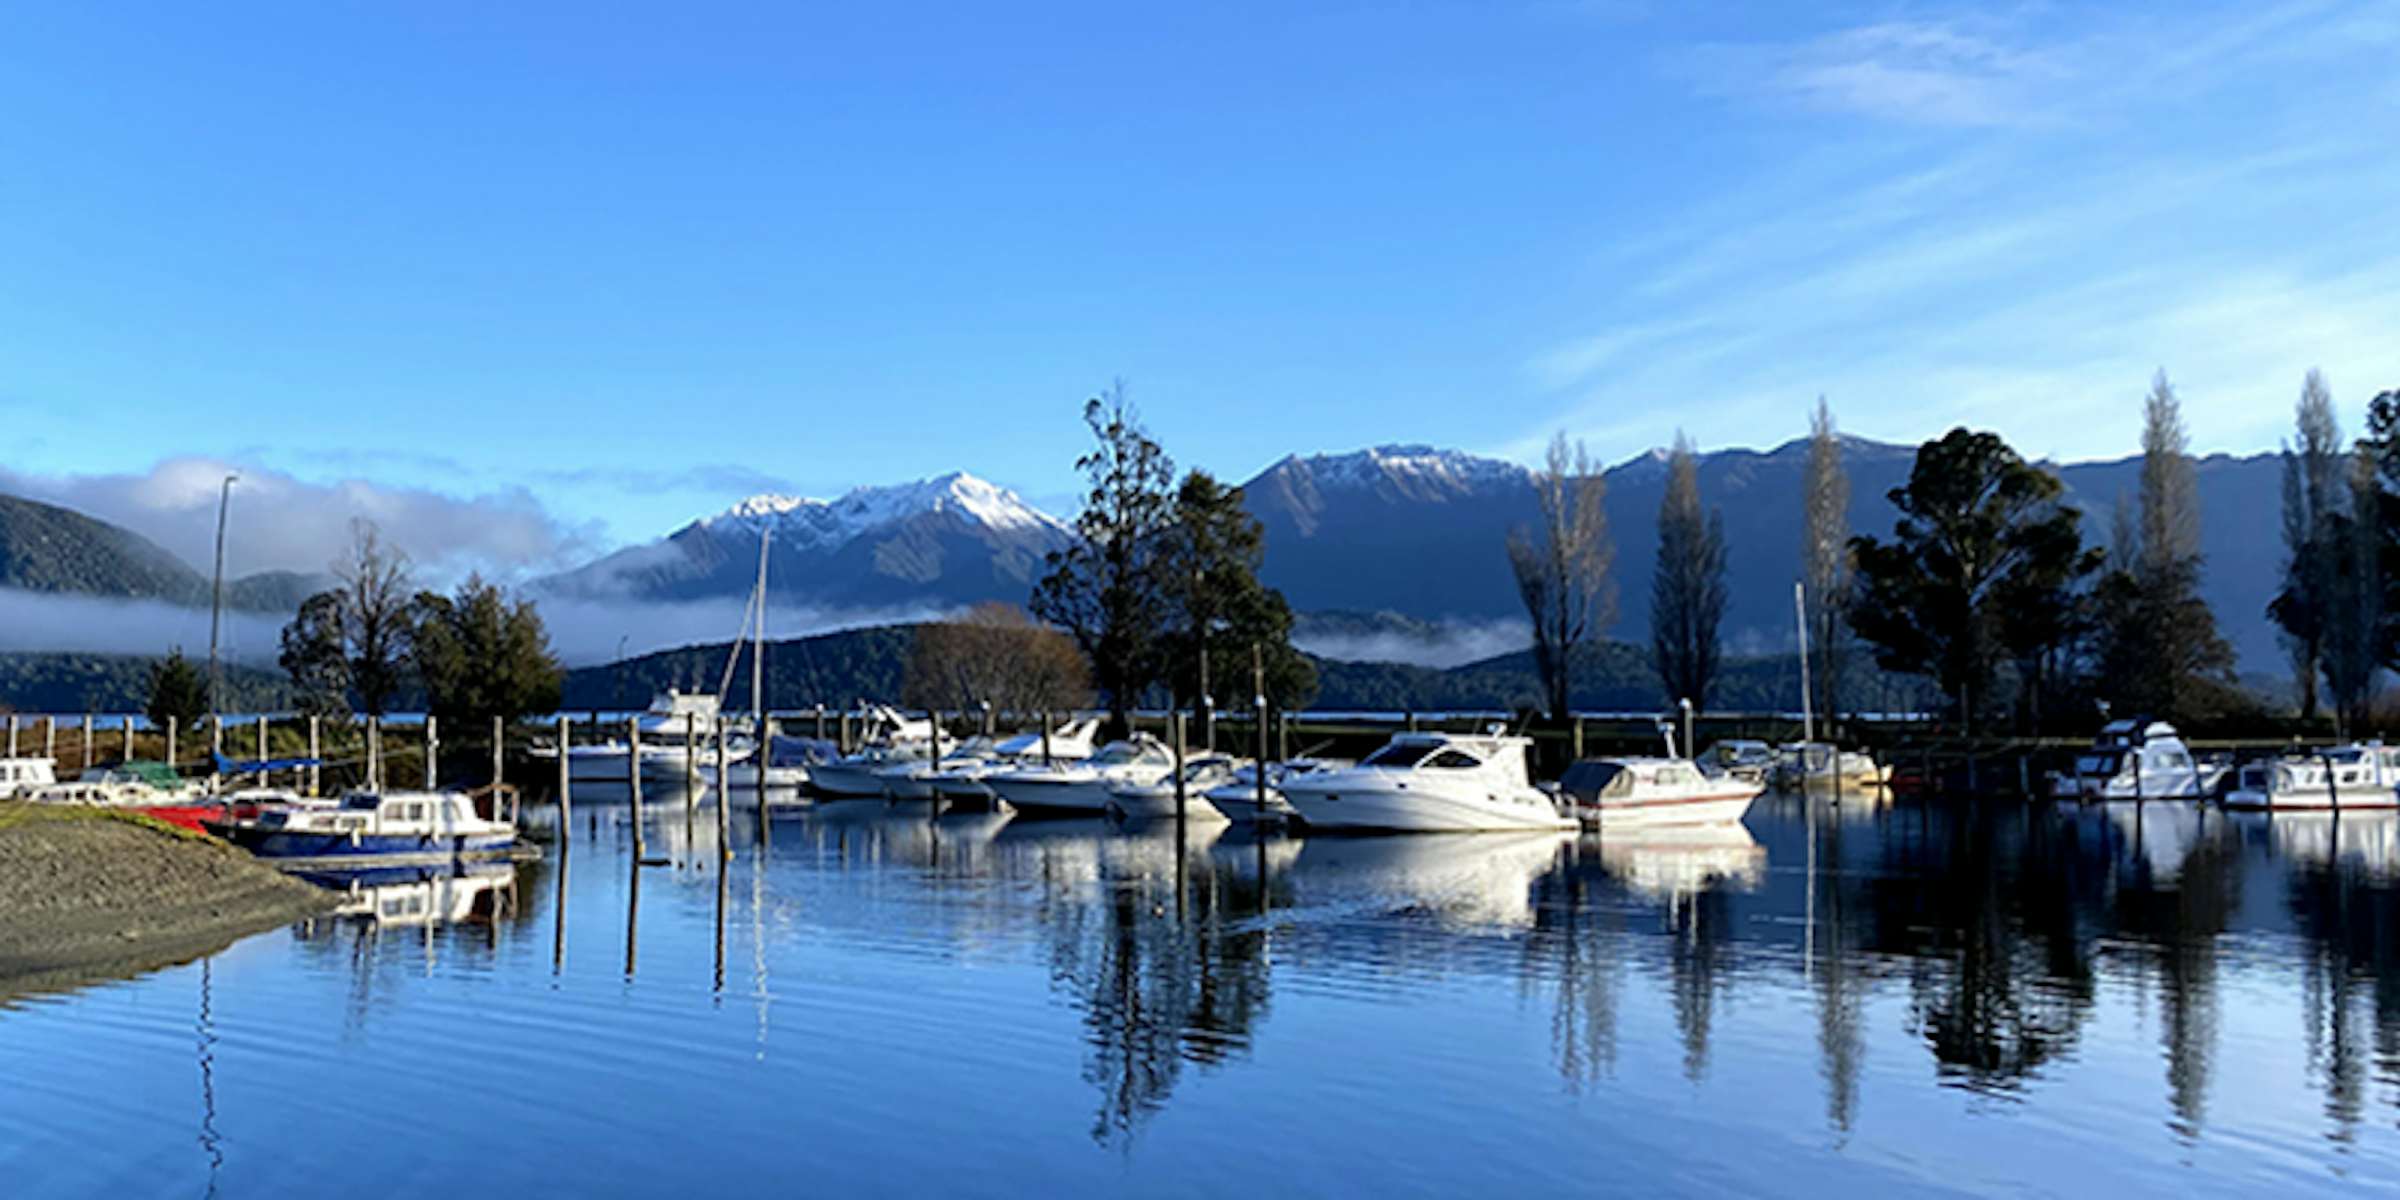 Common boat insurance claims during winter